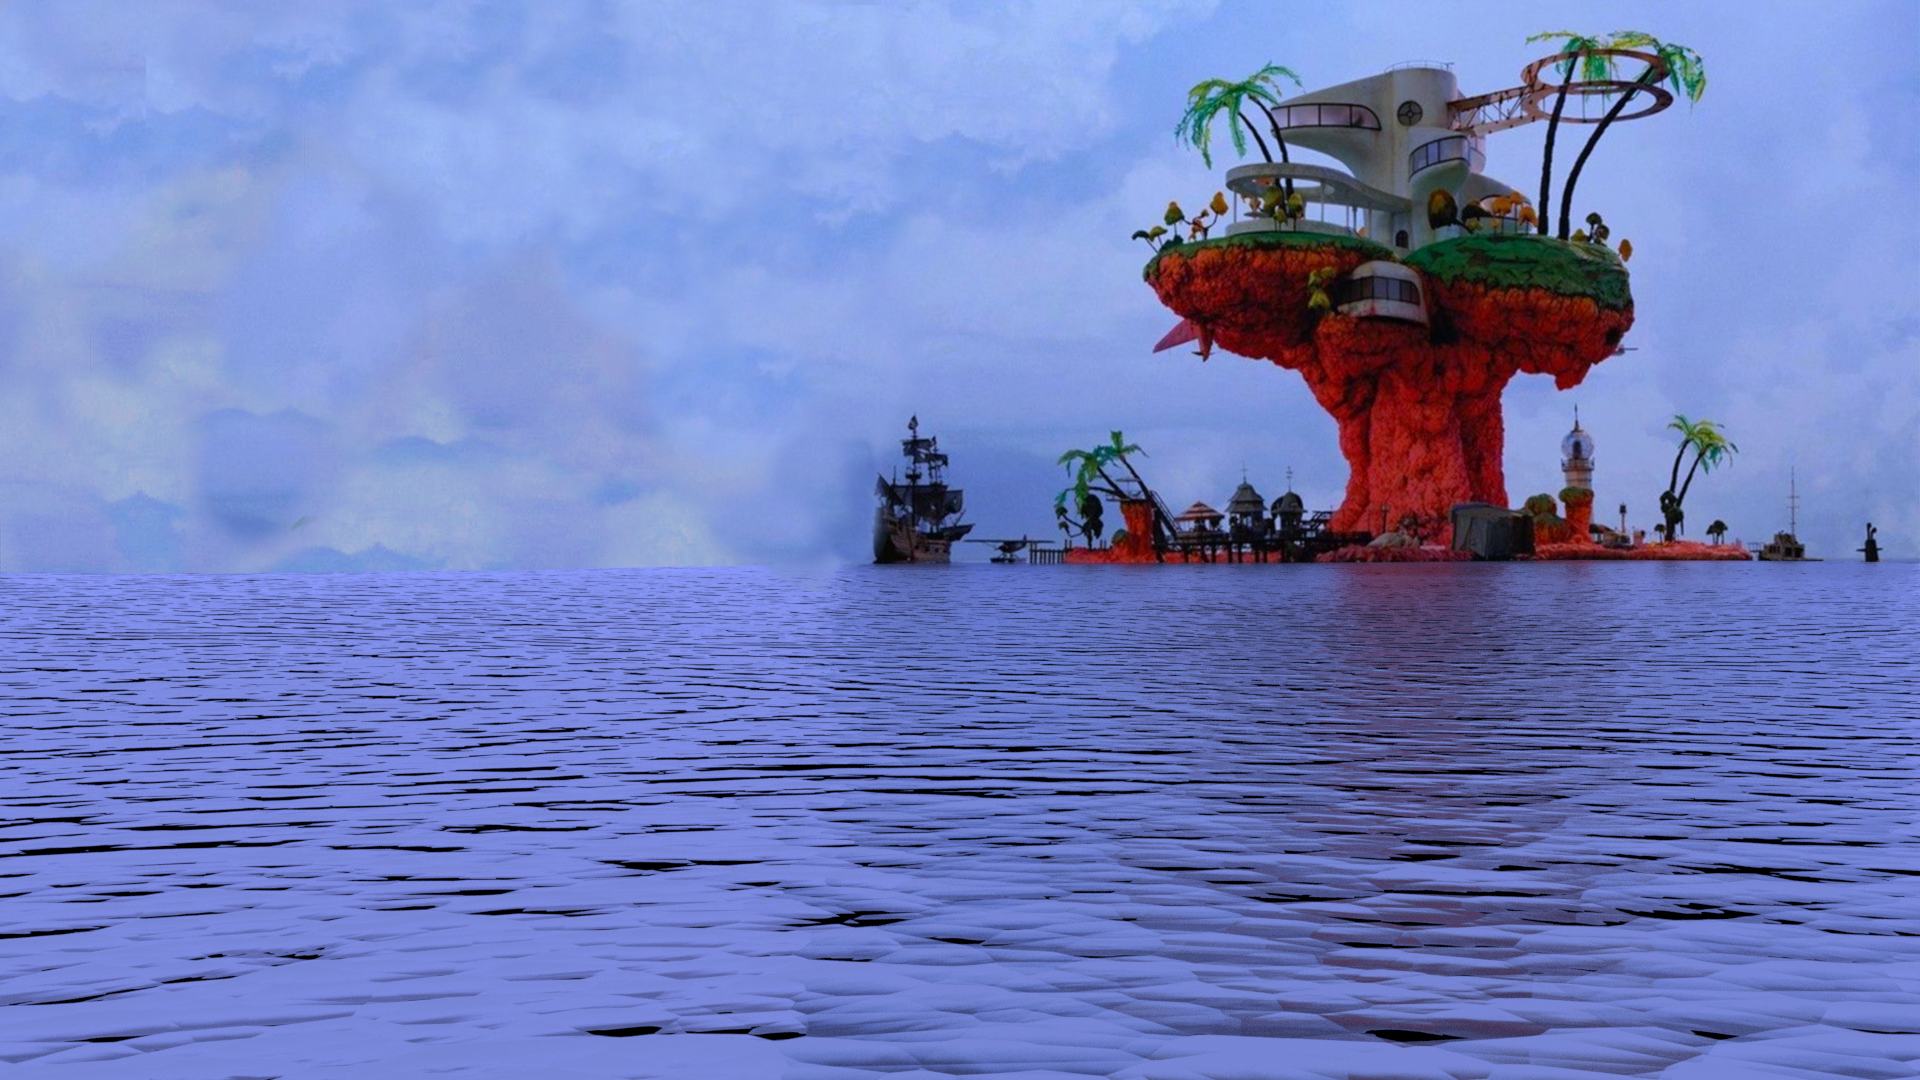 The Plastic Beach Water Different As A Desktop Background This Is